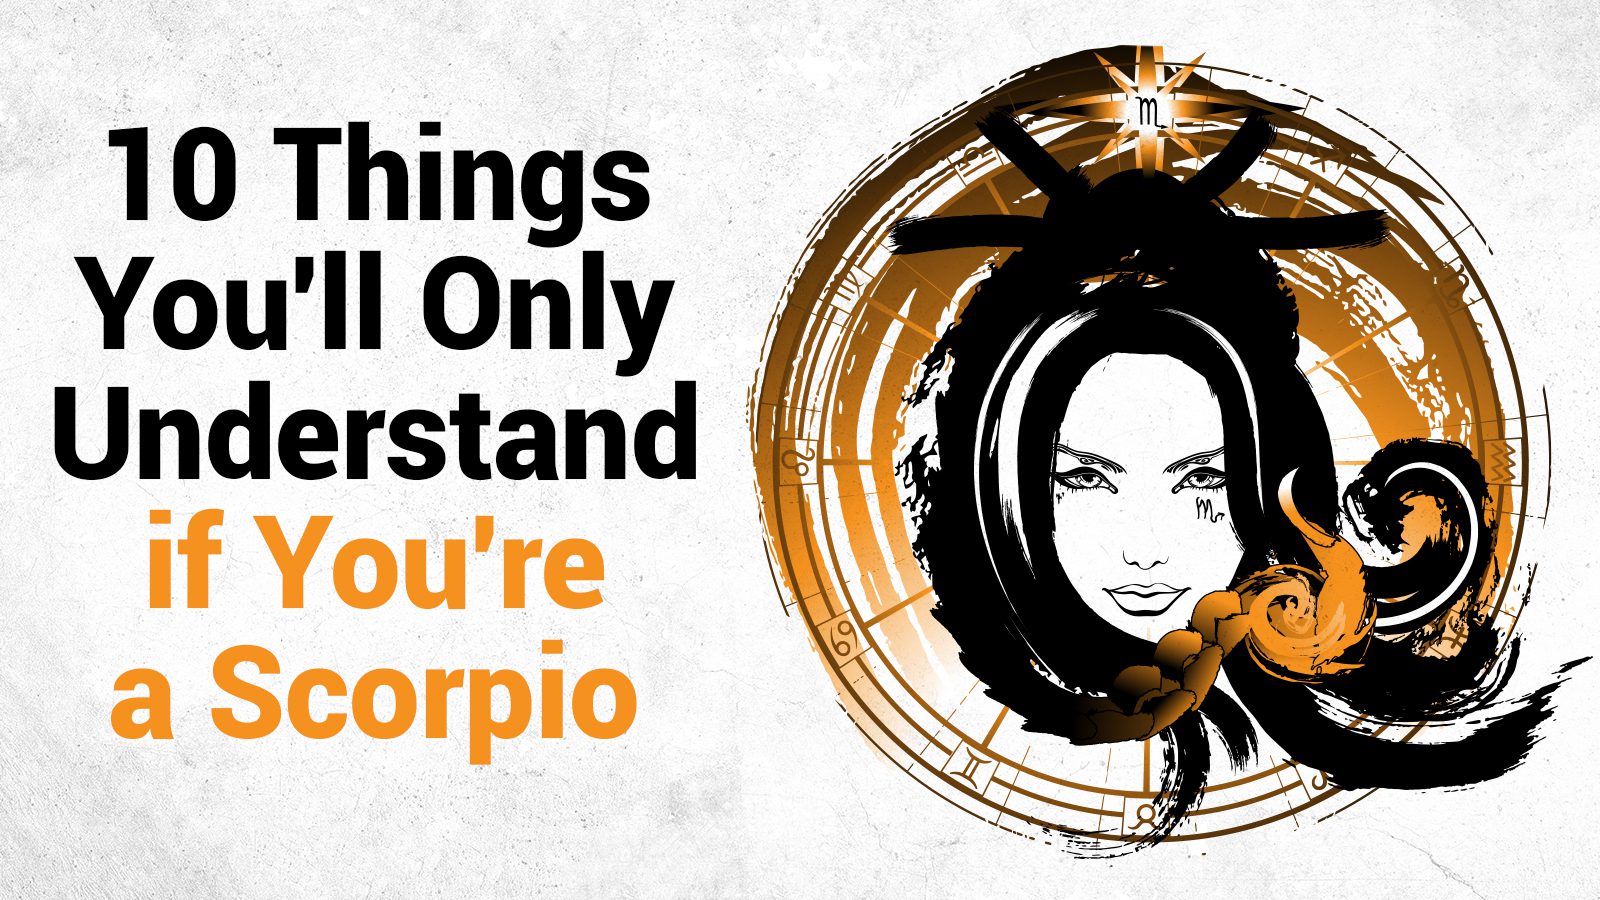 10 Things You’ll Only Understand if You’re a Scorpio